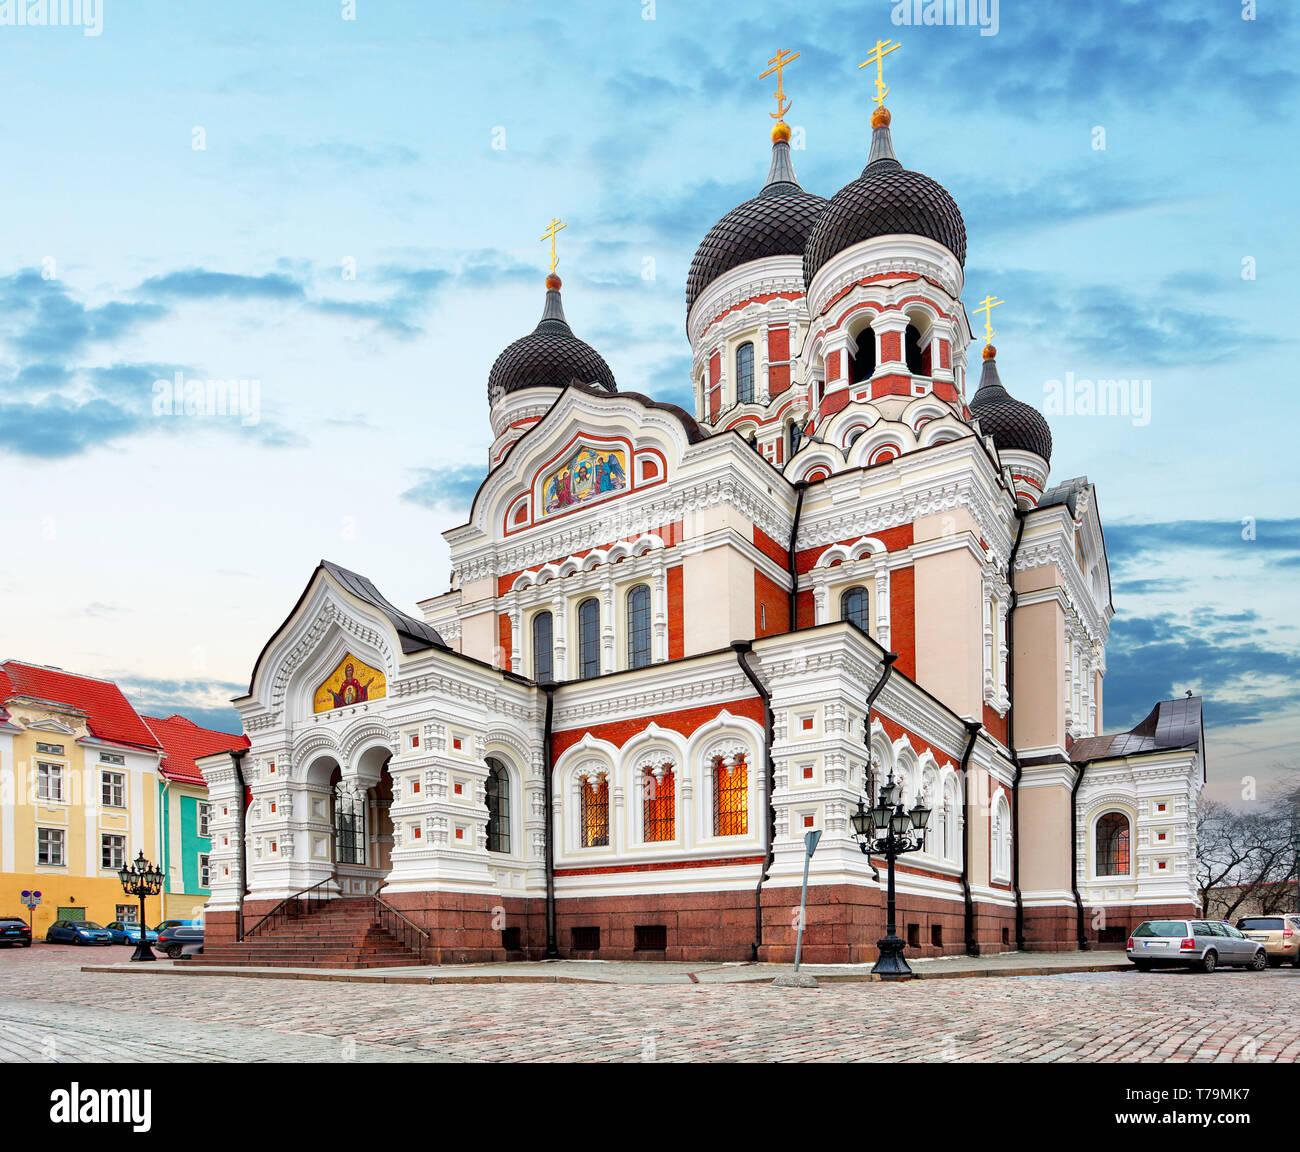 Alexander Nevsky Cathedral in the Tallinn Old Town, Estonia Stock Photo